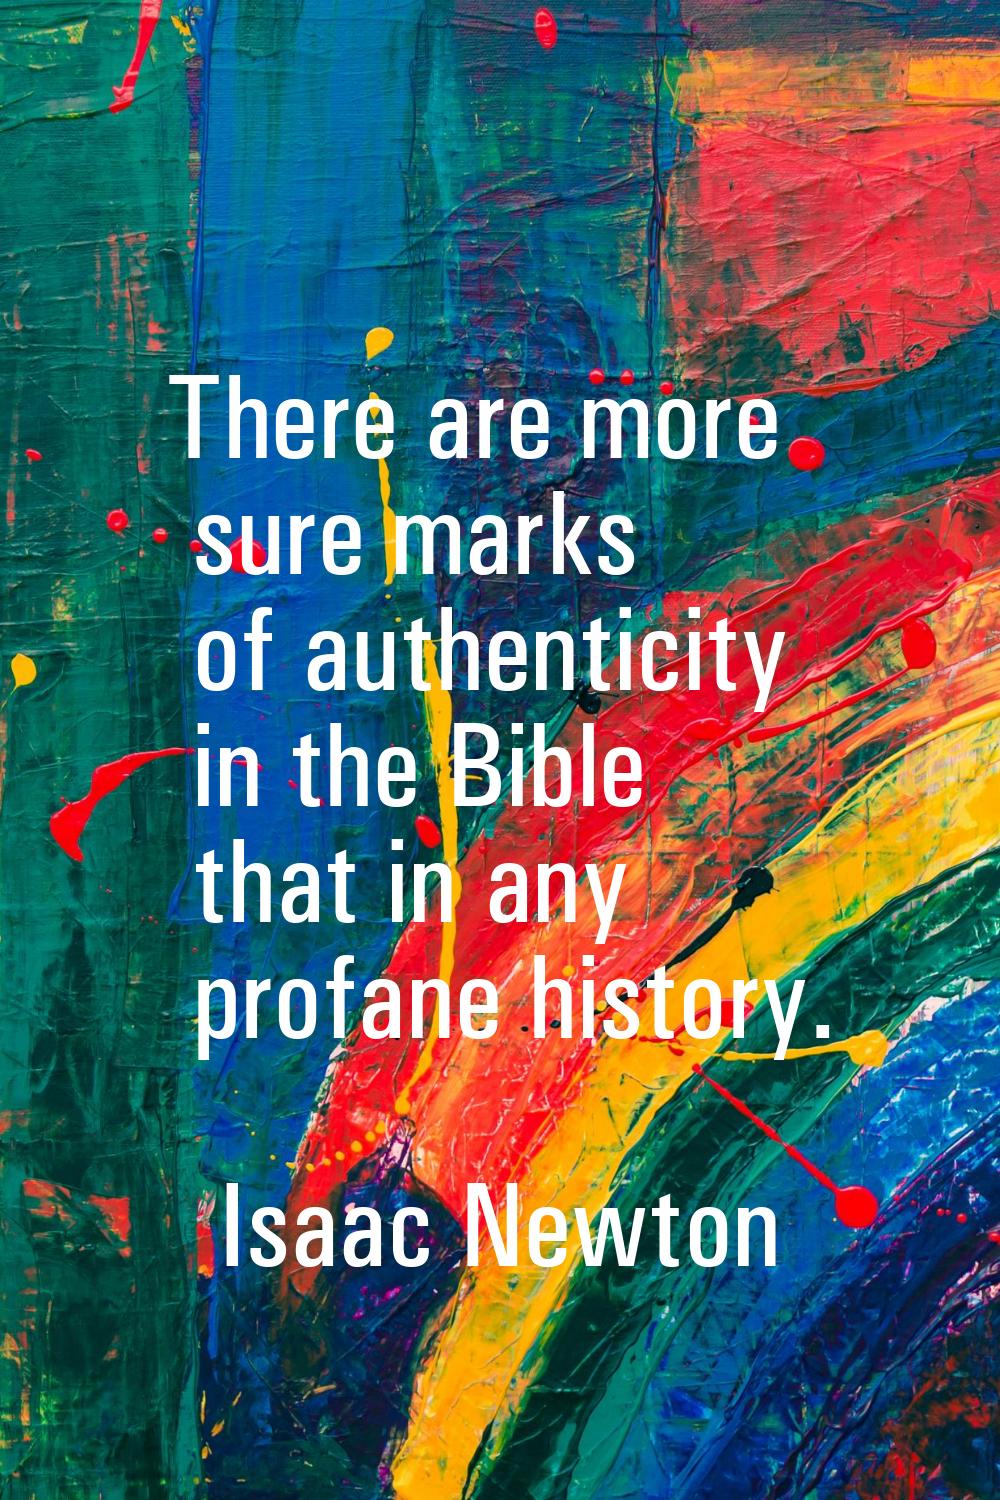 There are more sure marks of authenticity in the Bible that in any profane history.